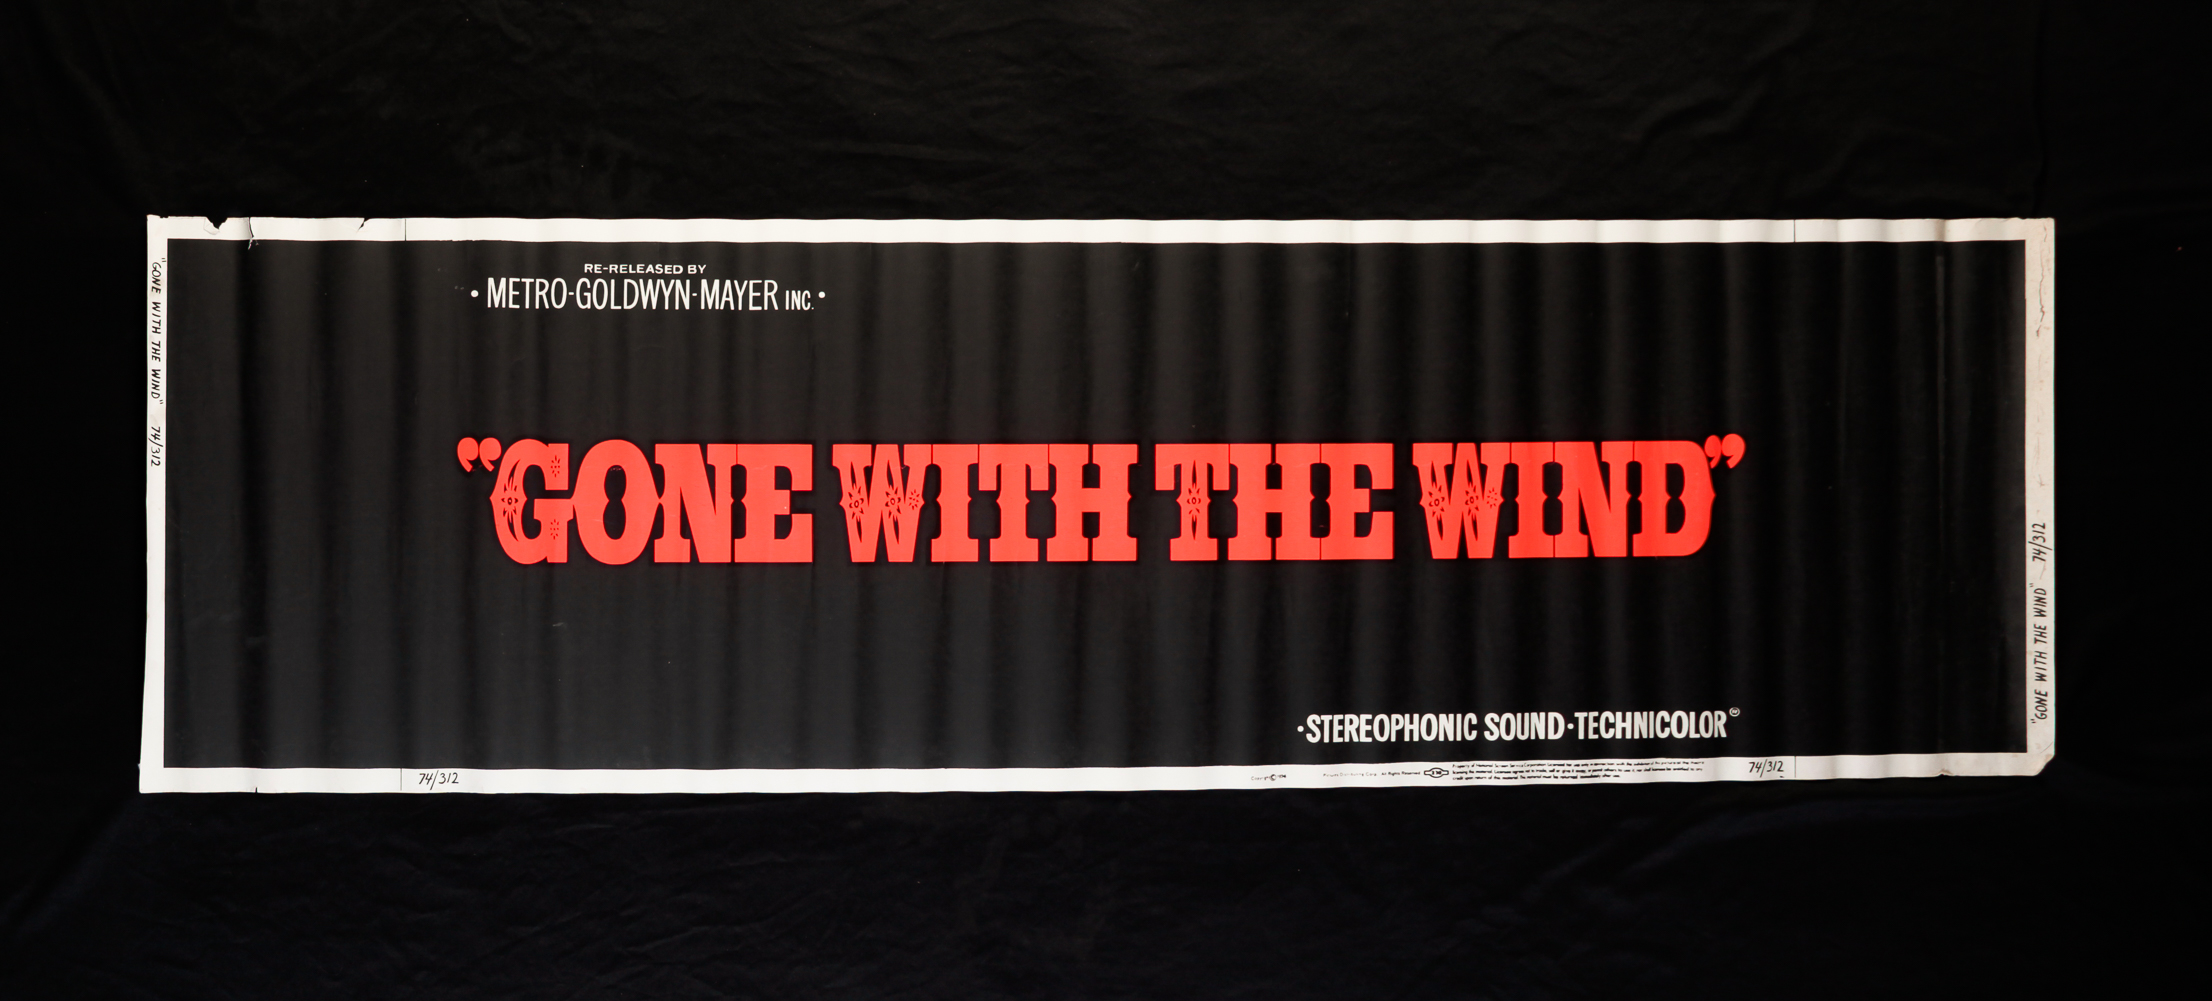 GONE WITH THE WIND MOVIE BANNER. MGM,